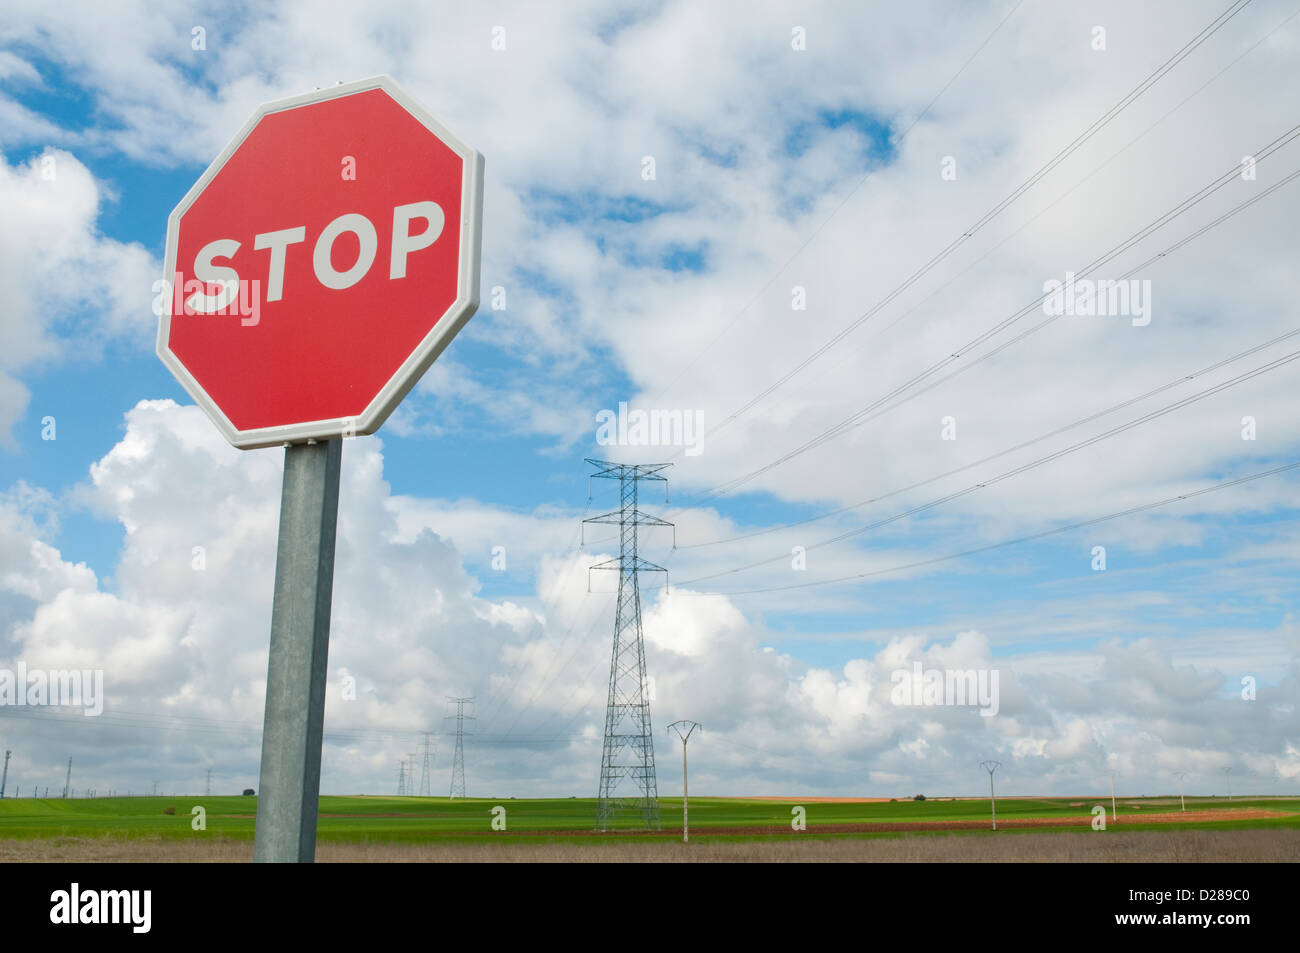 Stop traffic sign against cloudy sky, and landscape with power lines. Stock Photo